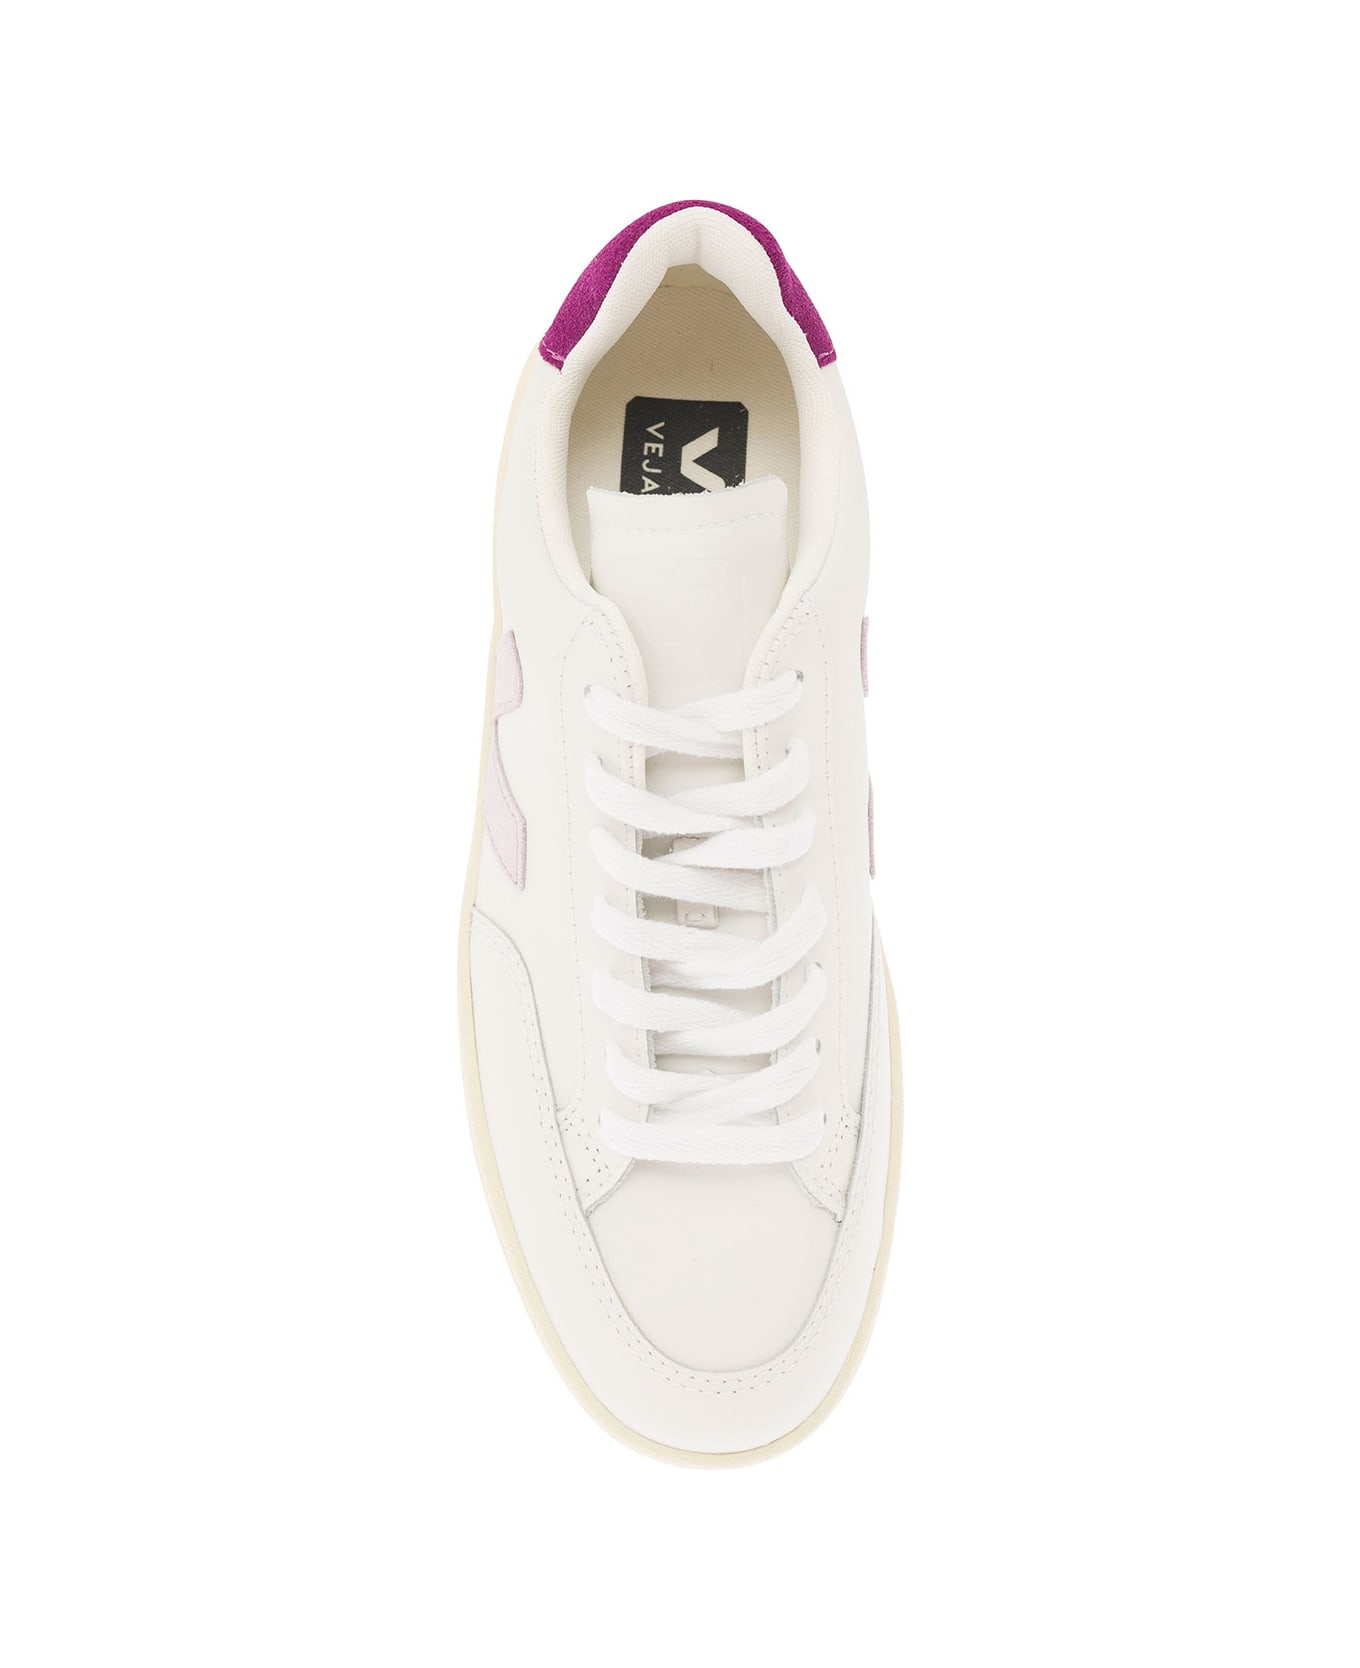 Veja White And Violet Sneakers With Logo Details In Leather Woman - White